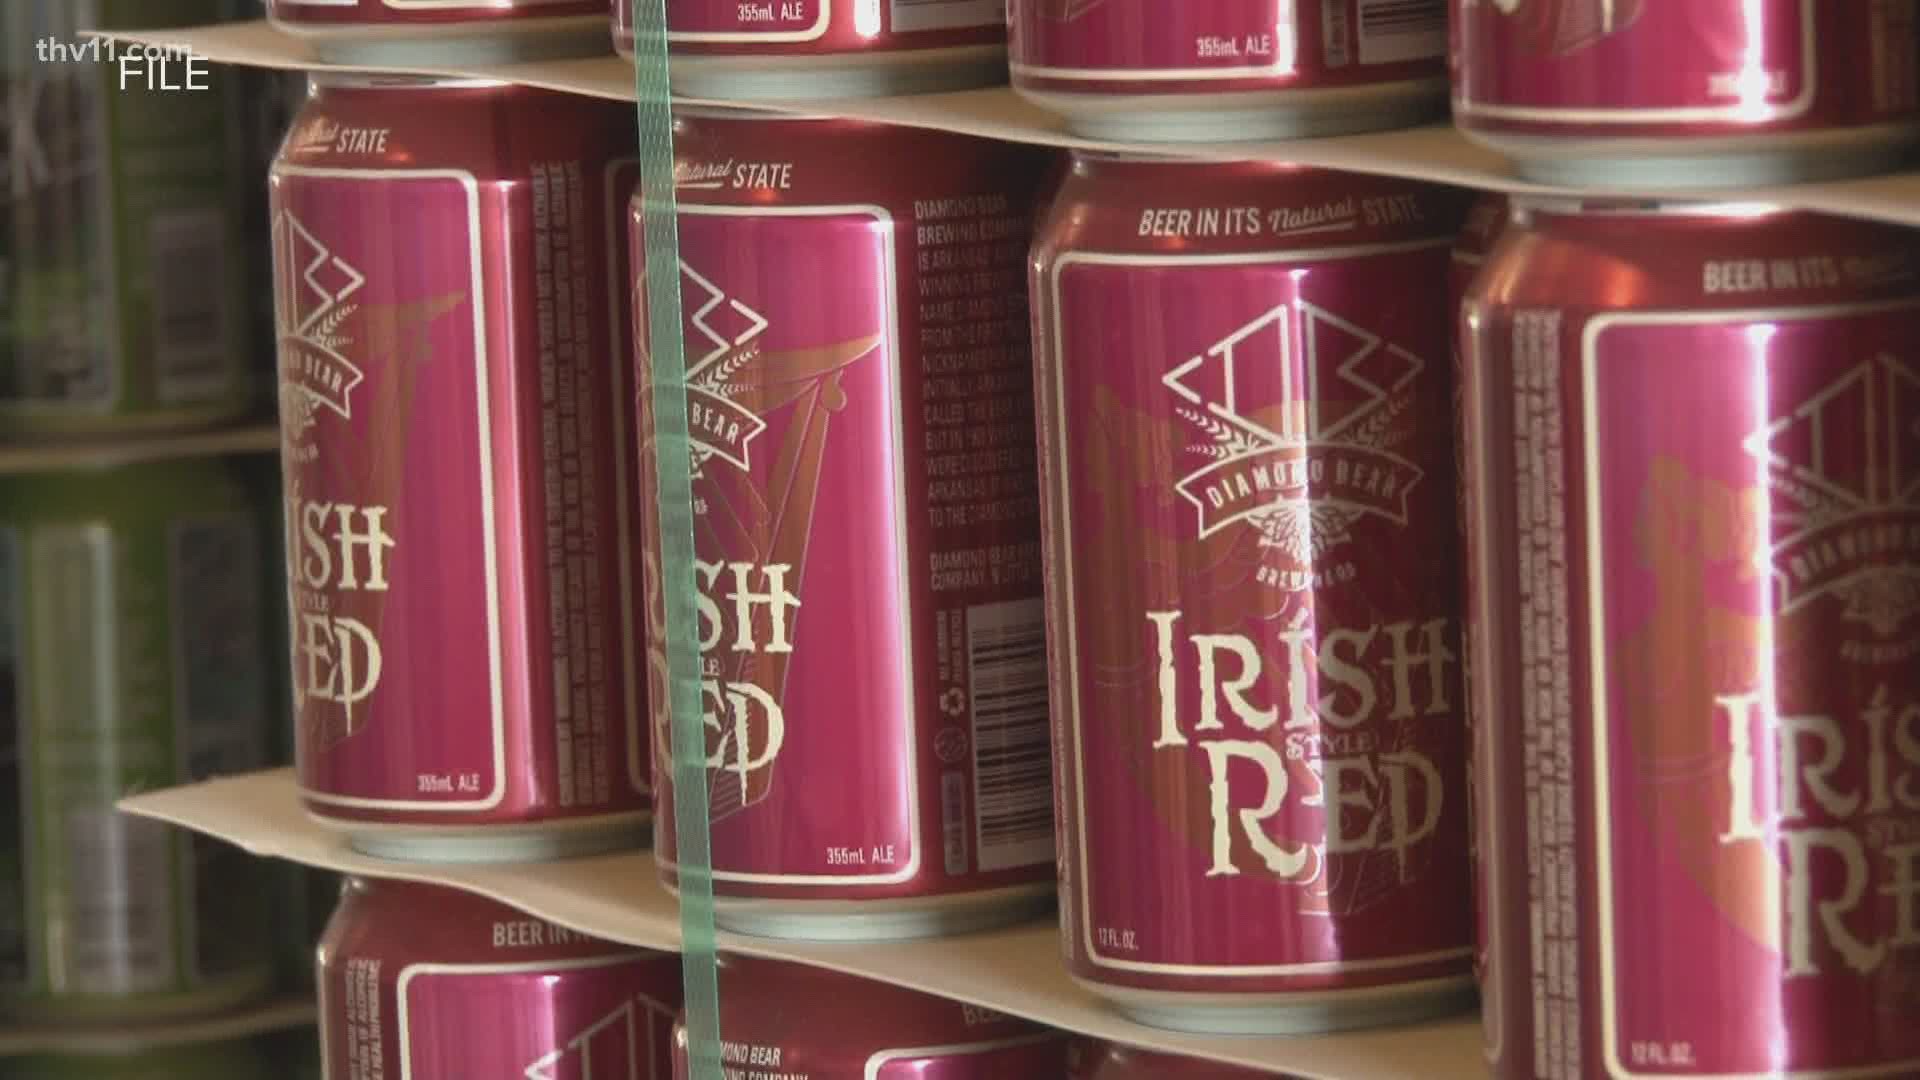 Popular Arkansas beers like Bluewing Berry Wheat may become harder to find if can manufacturers continue to not be able to keep up.